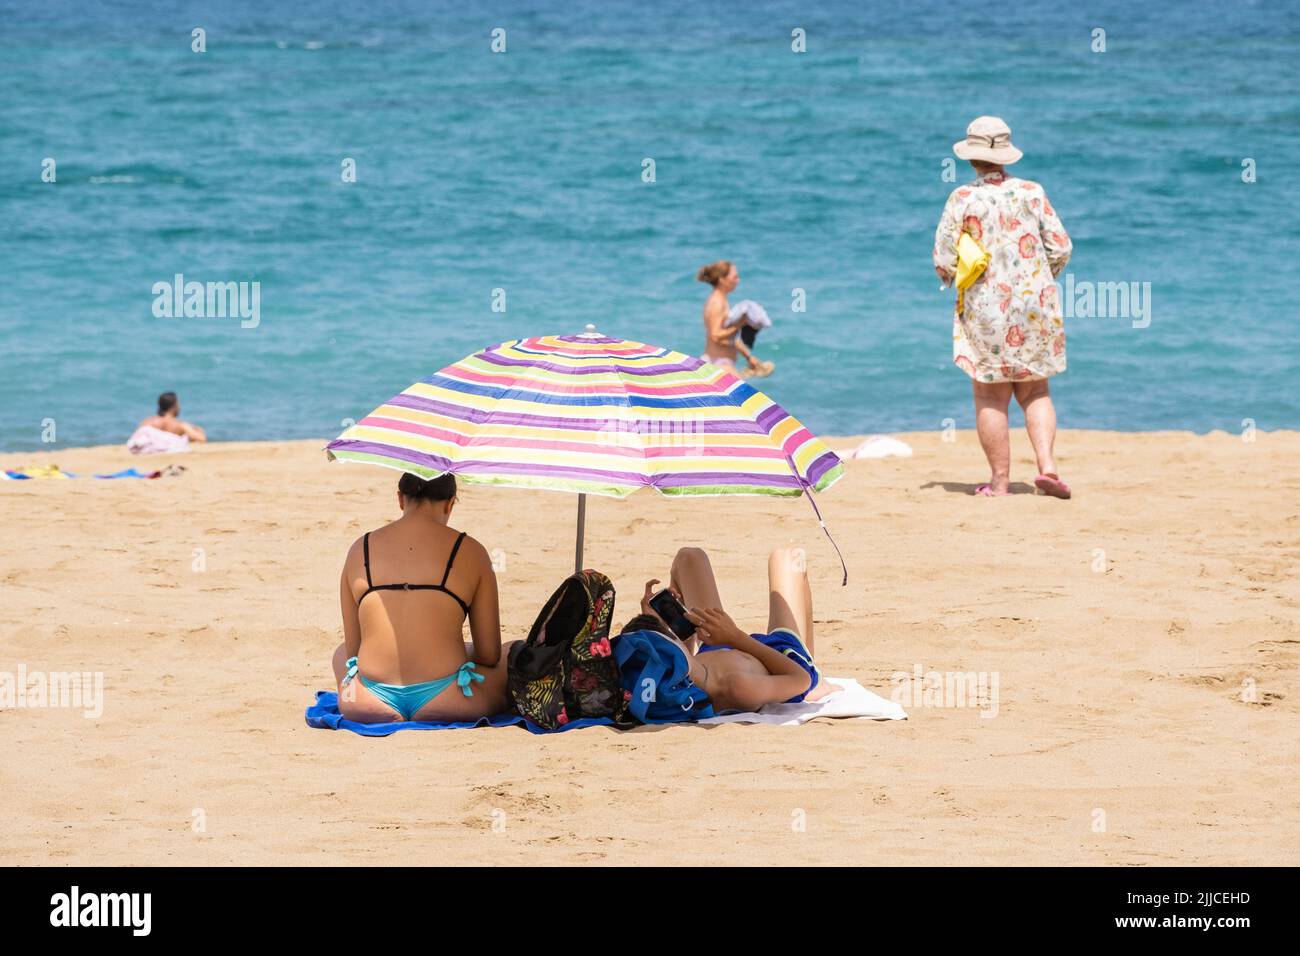 Las Palmas, Gran Canaria, Canary Islands, Spain. 25th July, 2022. Tourists, many from the UK, bask on the city beach in Las Palmas as temperatures hover around 40 degrees Celcius in some places on Gran Canaria during the current heatwave . Credit: Alan Dawson/ Alamy Live News. Stock Photo